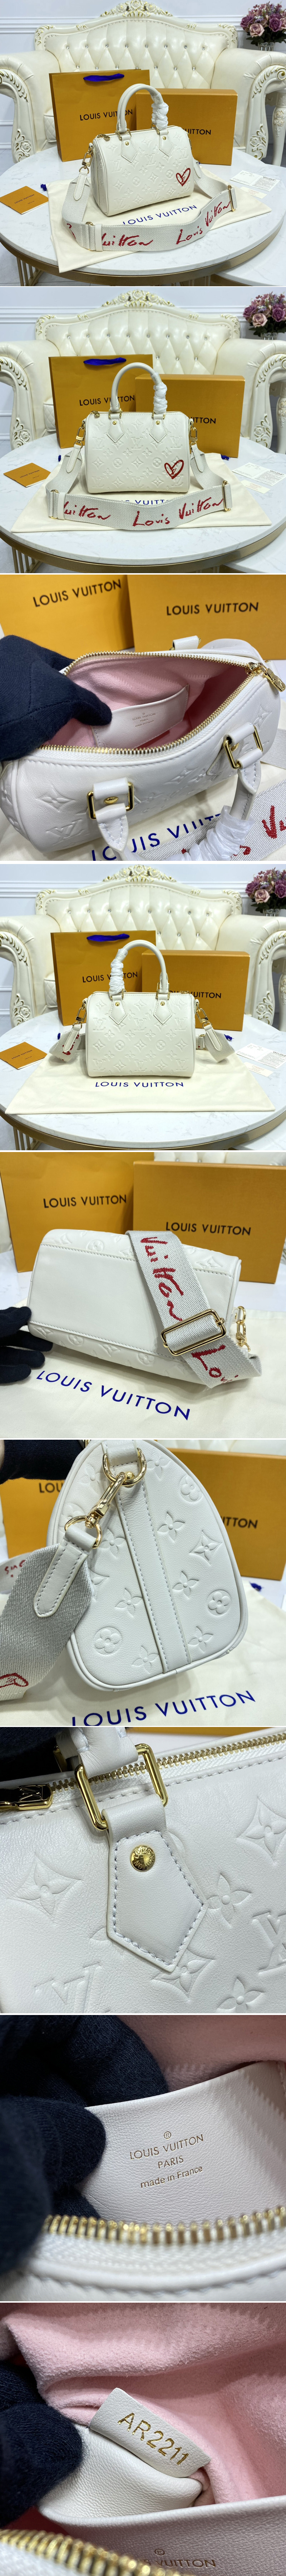 Louis Vuitton J02465 LV bandouliere Strap in Monogram canvas and Black  cowhide leather Replica sale online ,buy fake bag